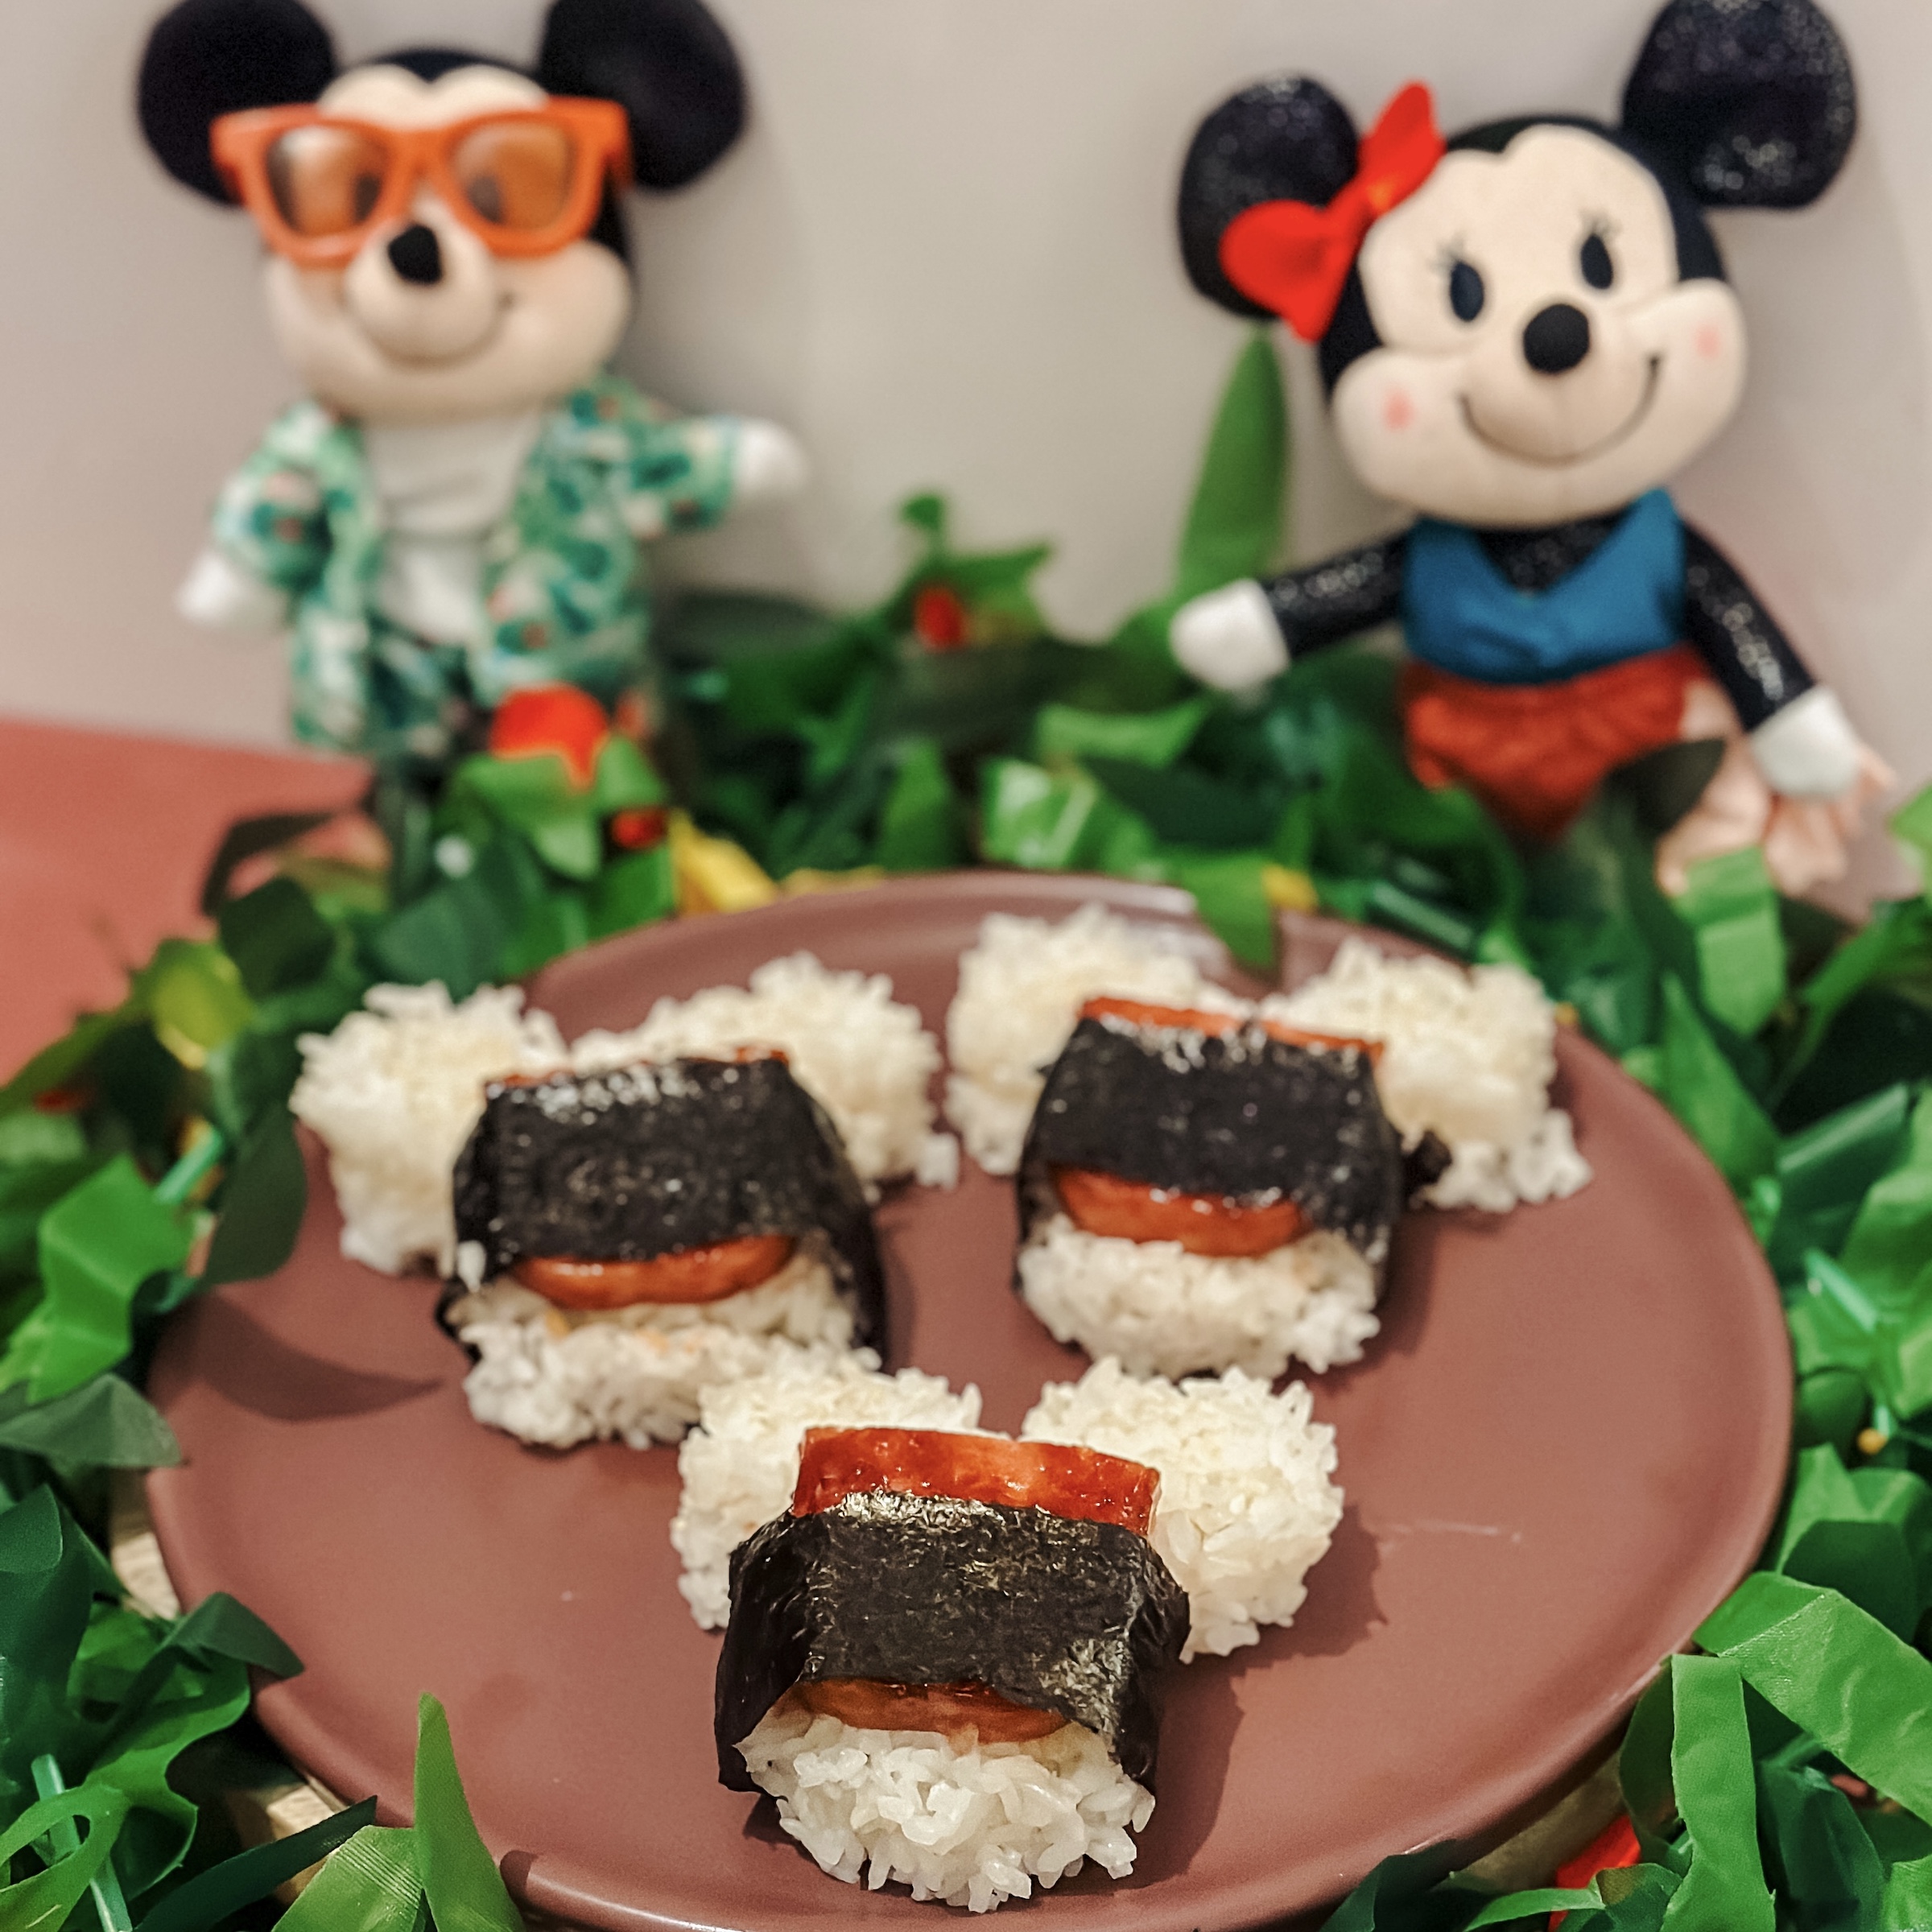 Mickey Musubi (sushi rice in a Mickey shaped with fried spam, wrapped in seaweed)